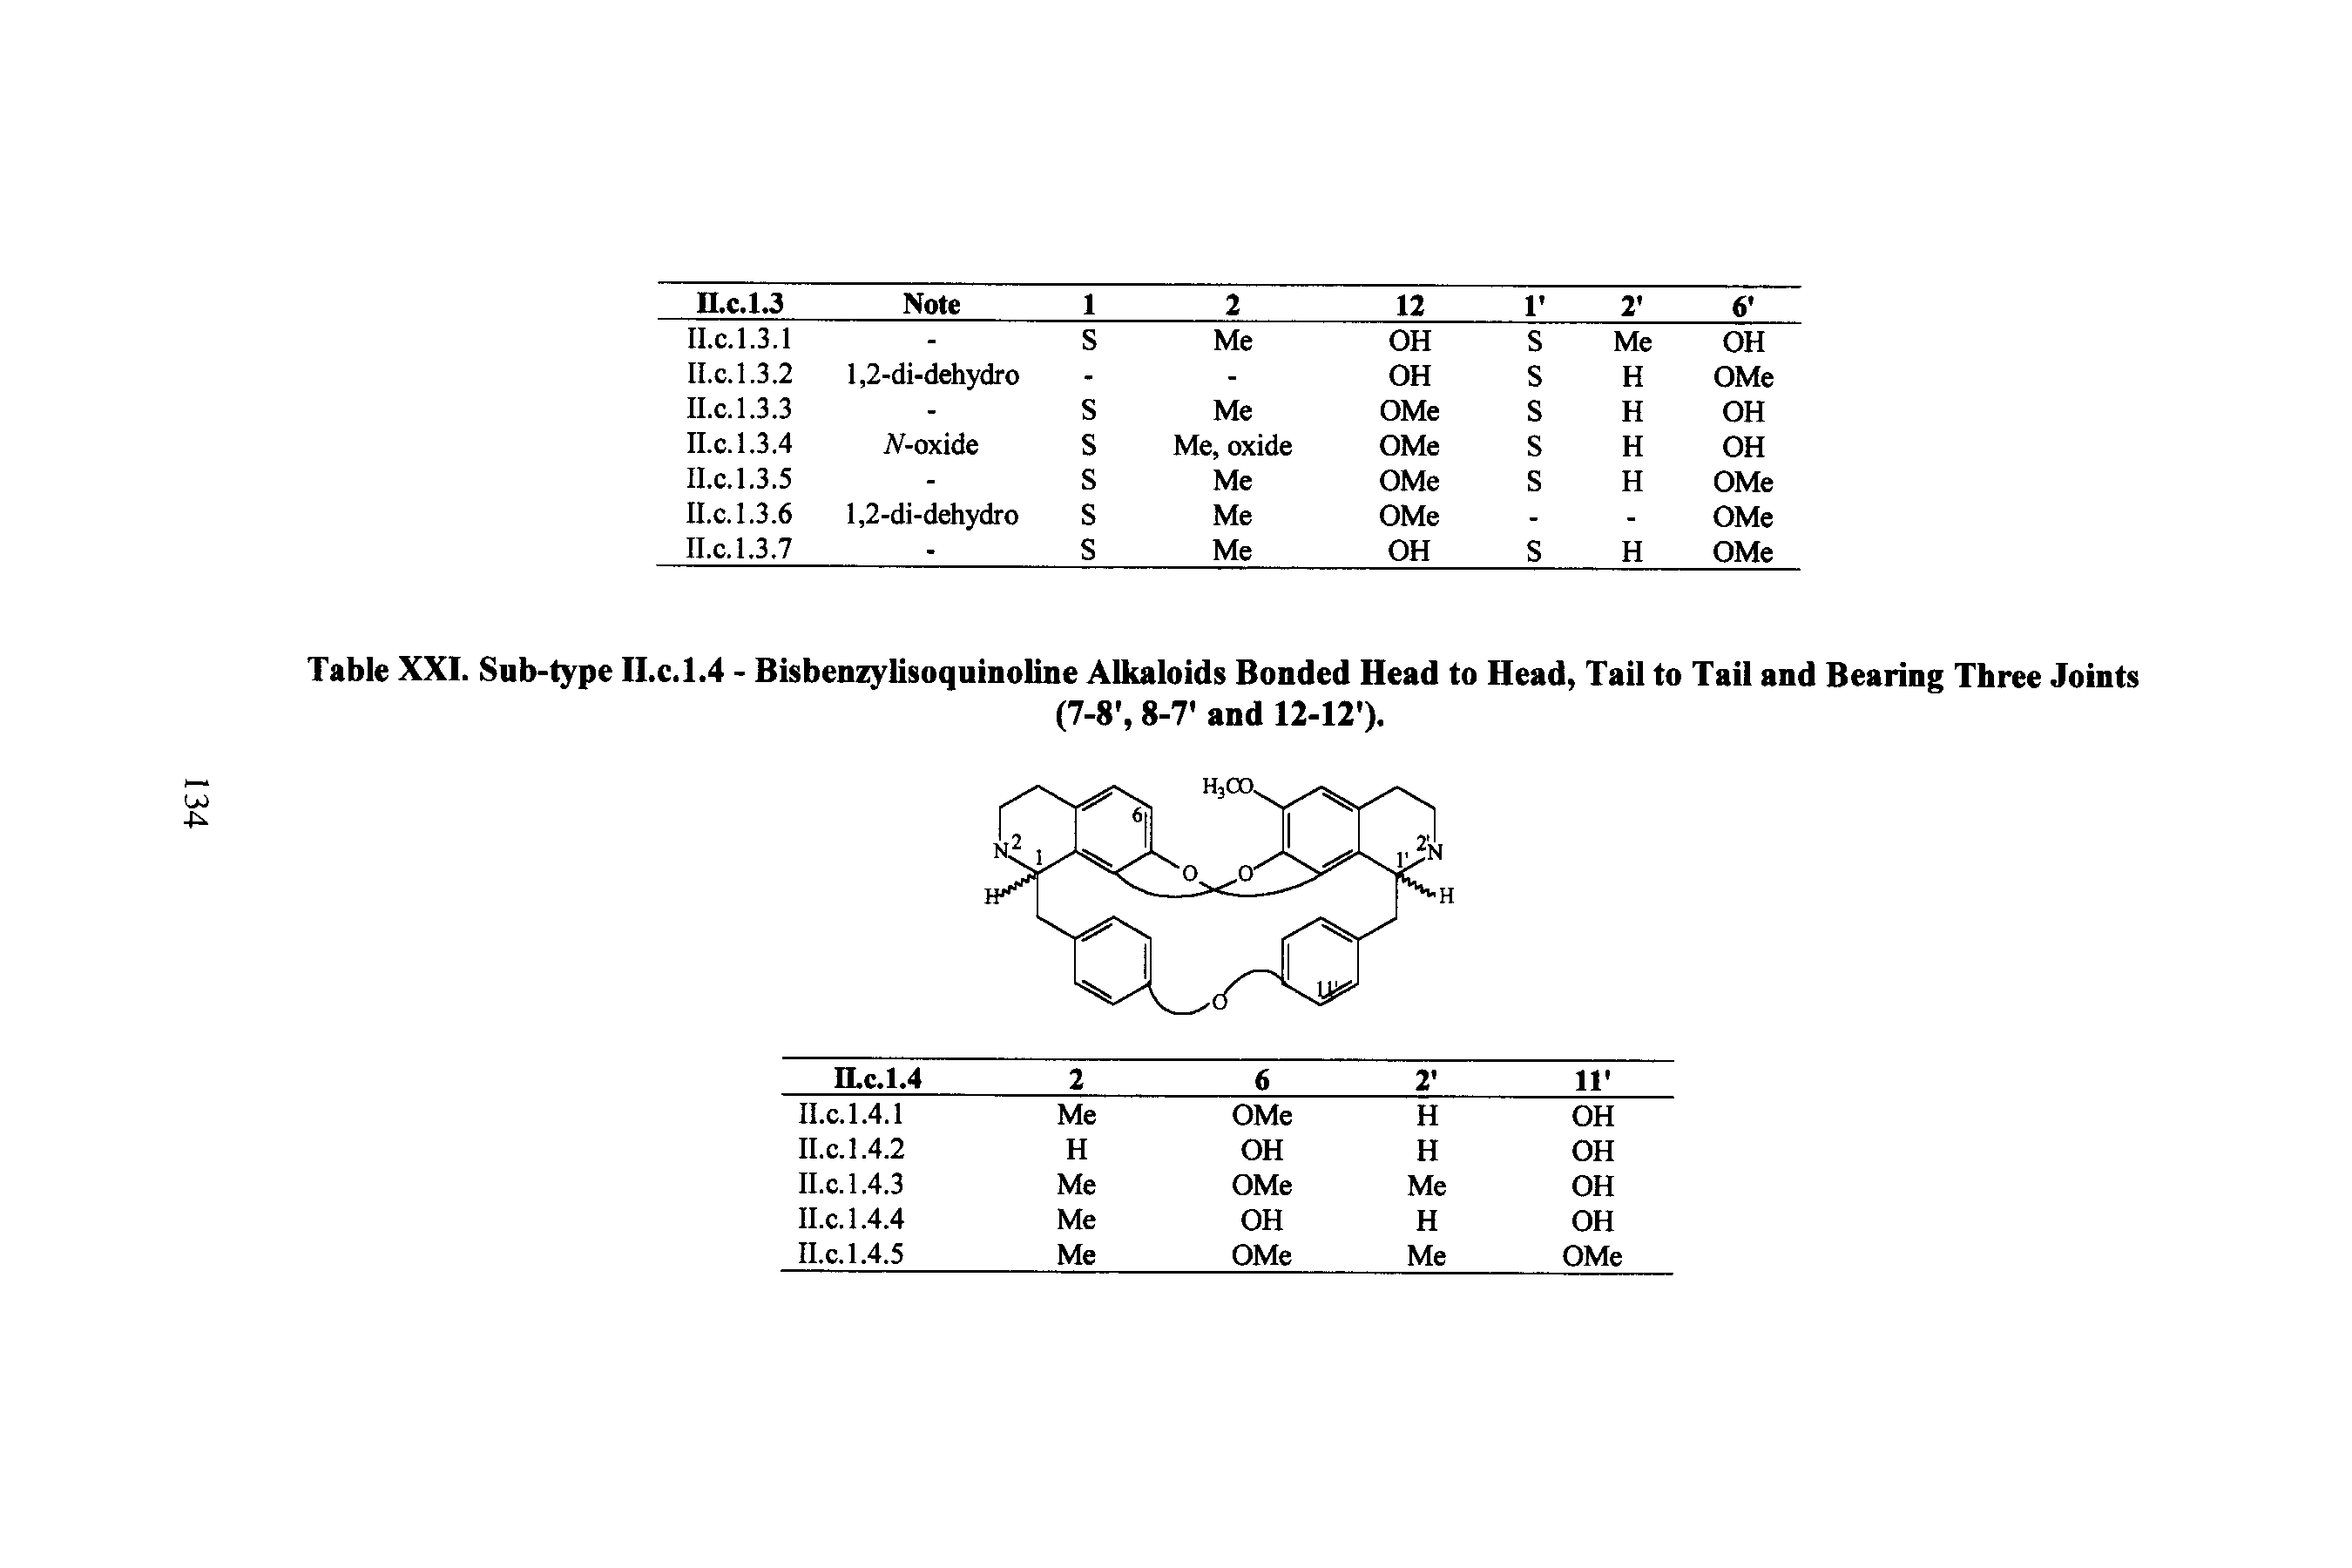 Table XXI. Sub-type II.c.1.4 - Bi benzylisoquinoline Alkaloids Bonded Head to Head, Tail to Tail and Bearing Three Joints...